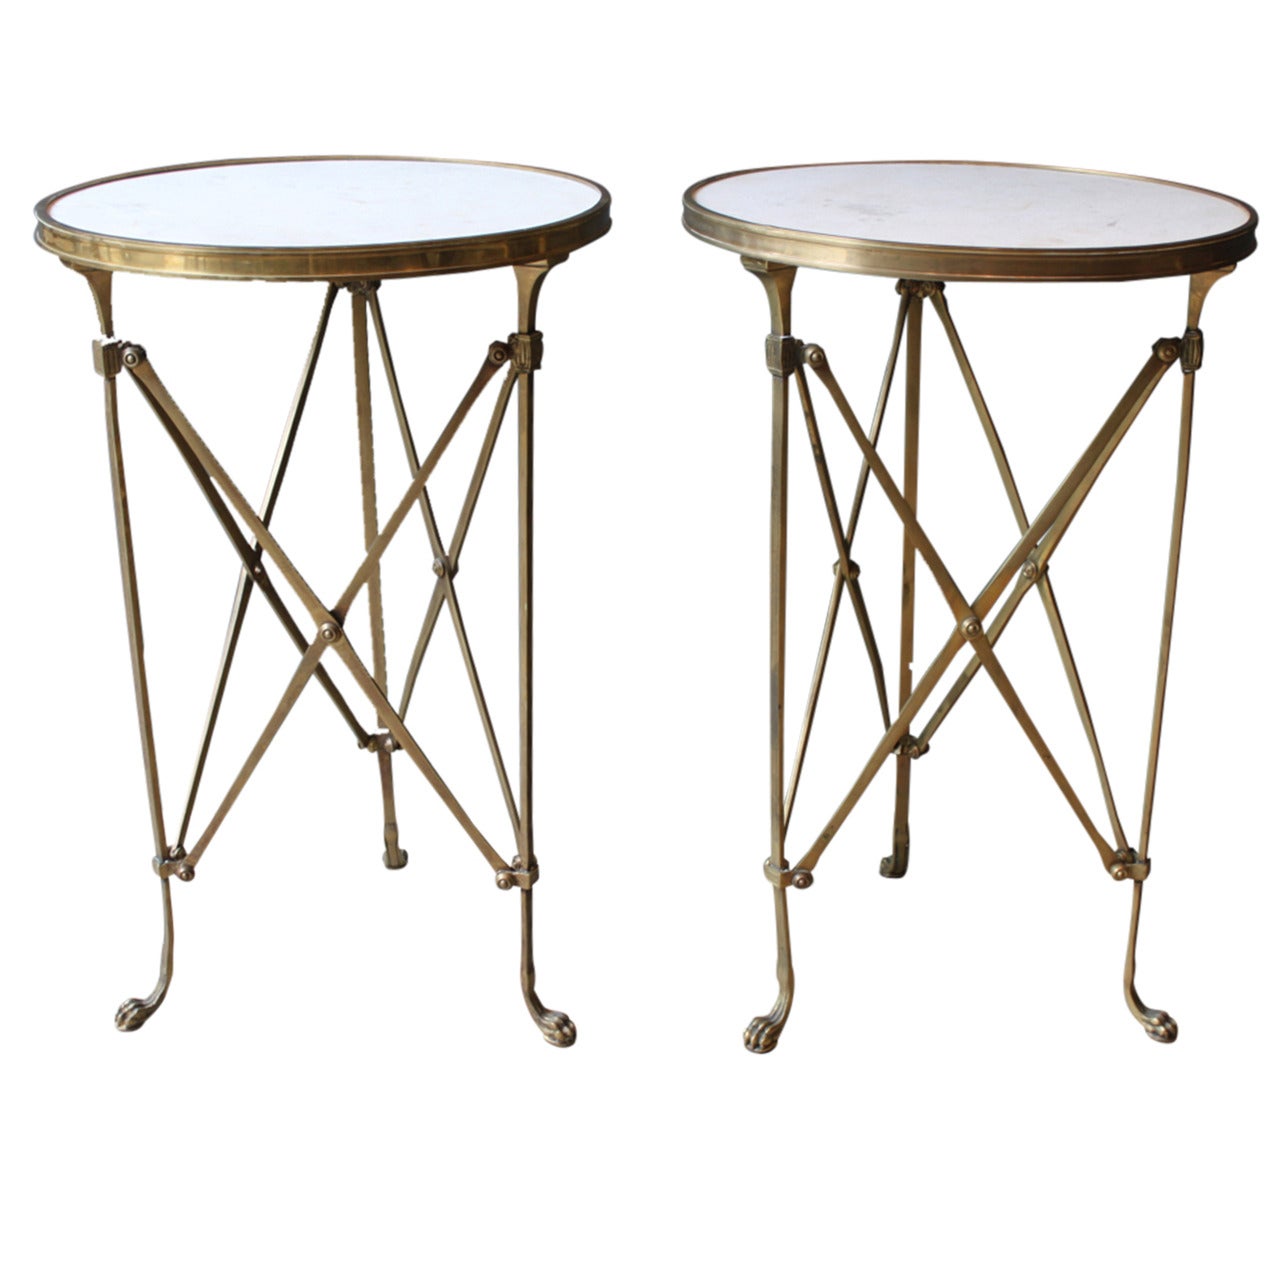 Pair of Neoclassical Bronze and Marble Gueridon Tables, France, circa 1920